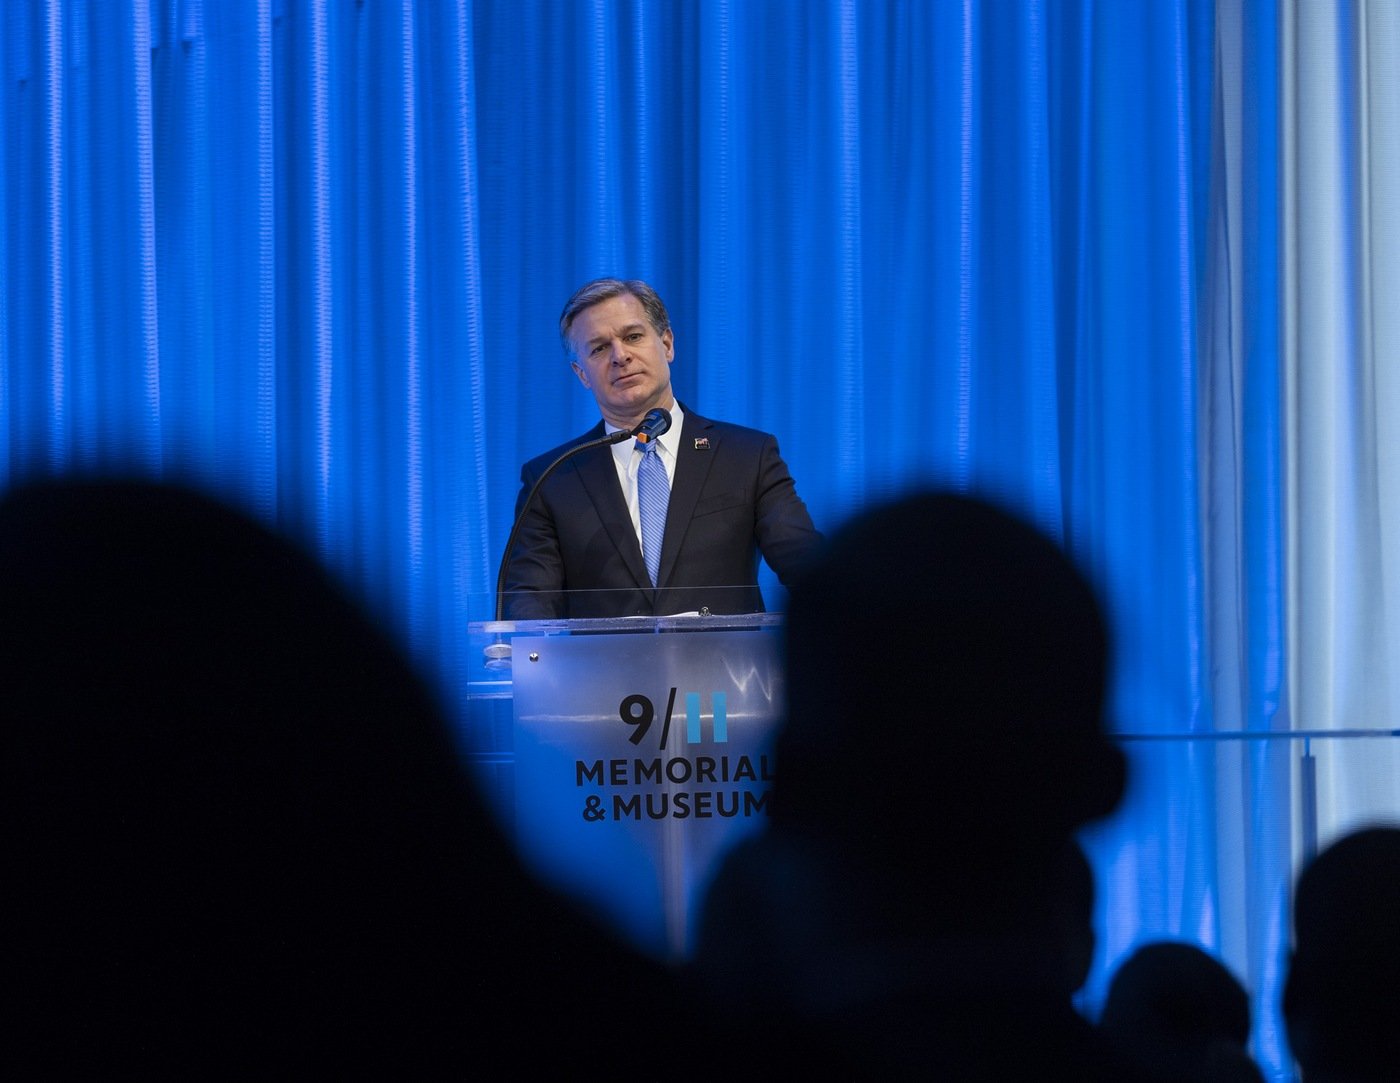 FBI Director Christopher Wray addressed the newest class of FBI agents and intelligence analysts at the 9/11 Memorial & Museum in New York City on Saturday, March 9, 2019.